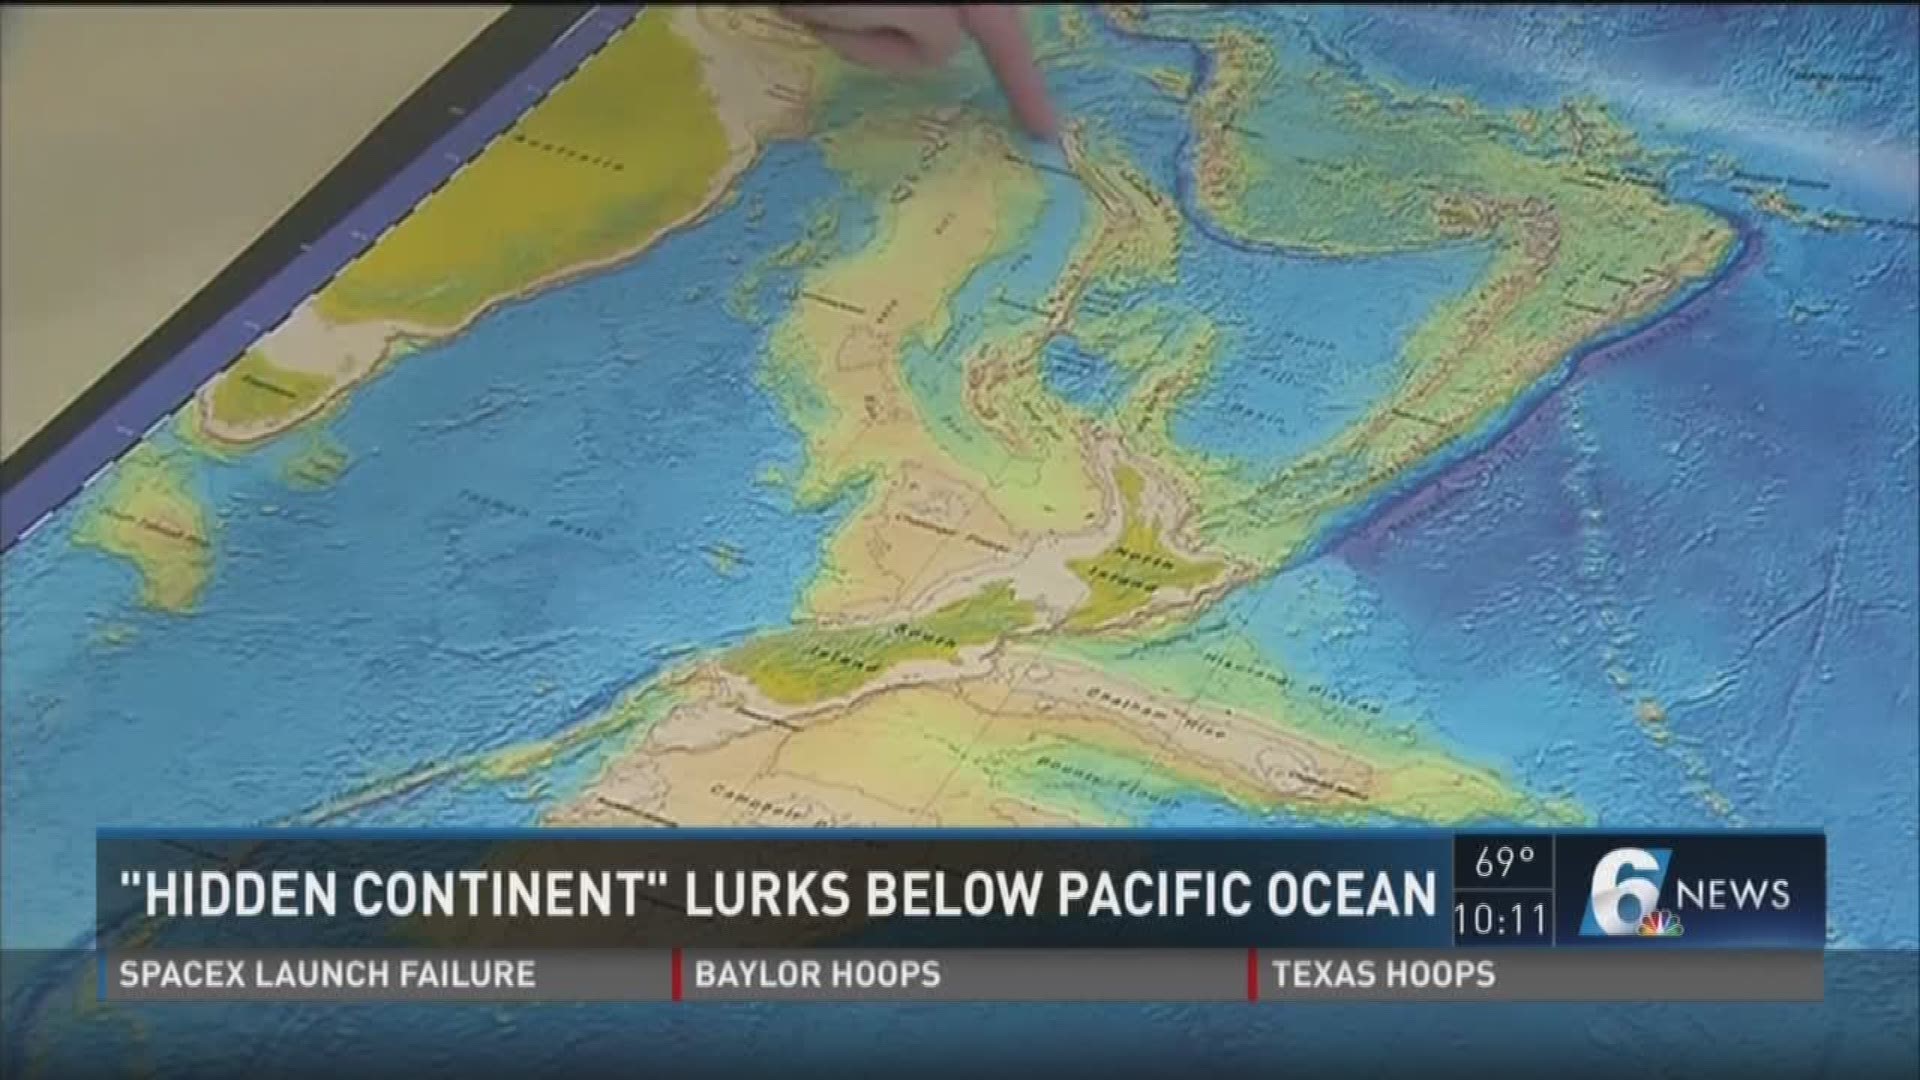 Scientists say a concealed land mass lurking beneath the waves in the Southwest Pacific Ocean should be recognized as the world's eighth continent.